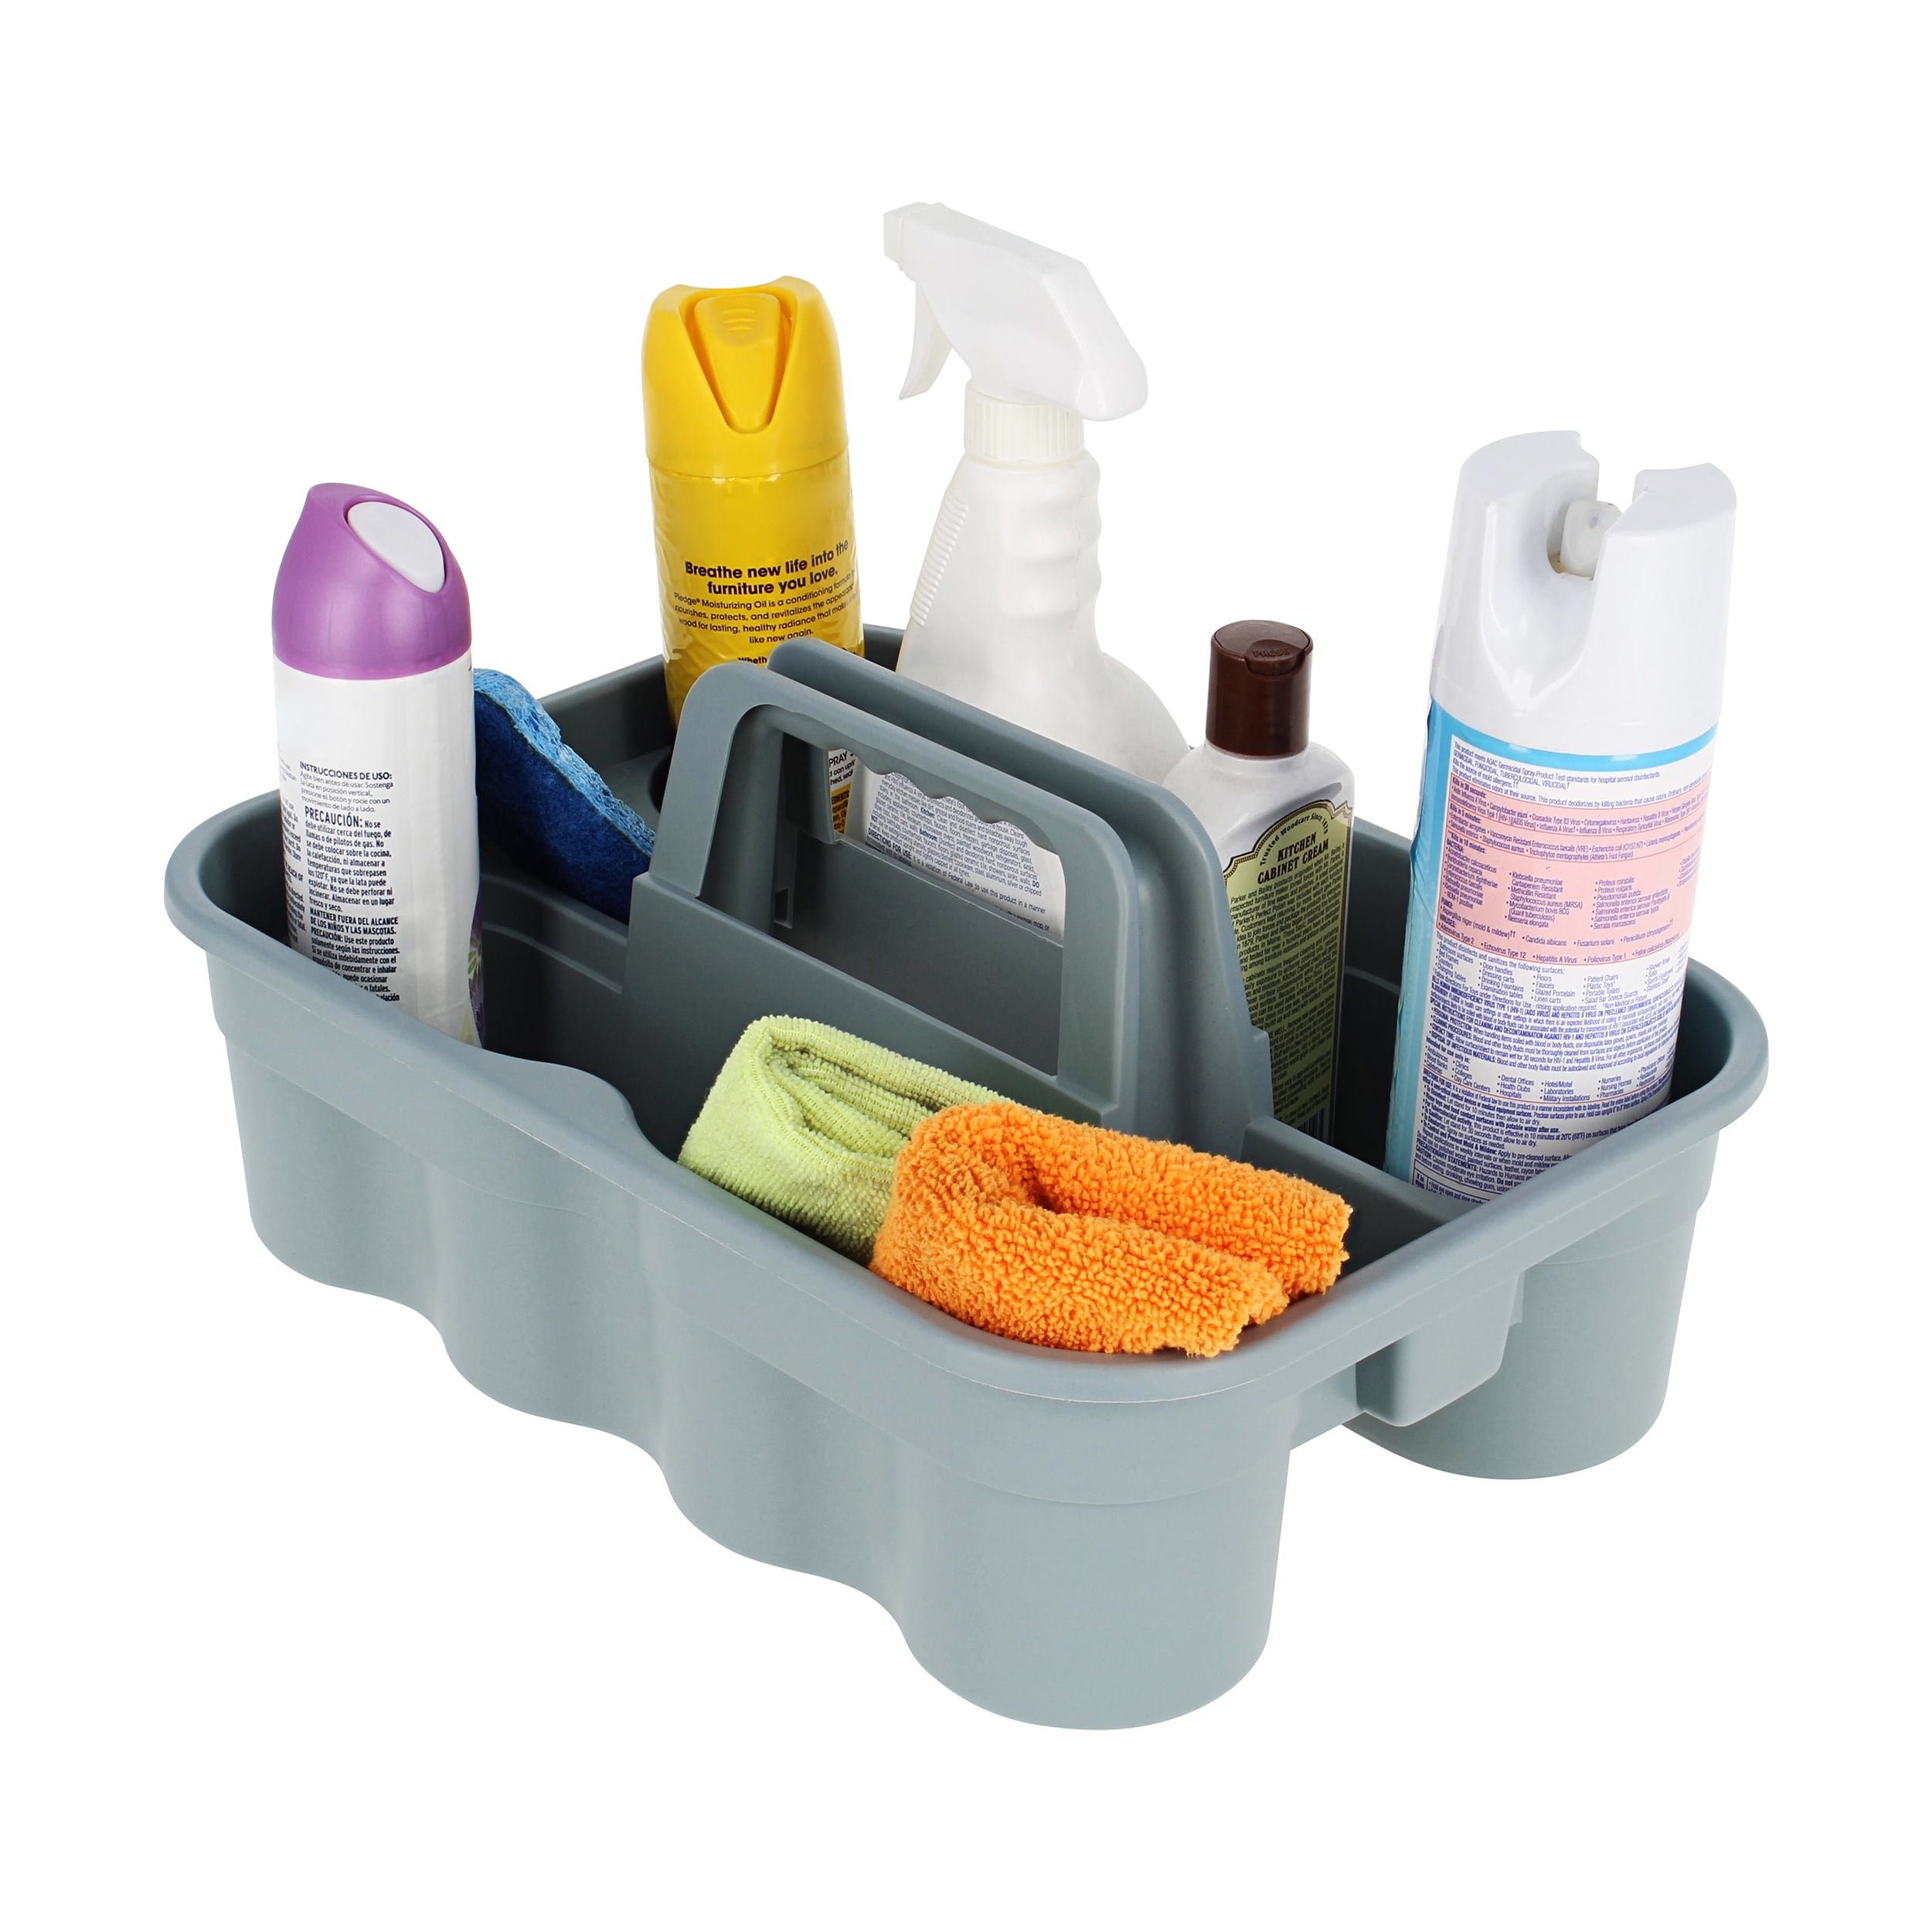 RW Clean Black Plastic Cleaning Caddy - 3 Compartments, with Handle - 15  1/4 x 13 1/4 x 6 3/4 - 1 count box